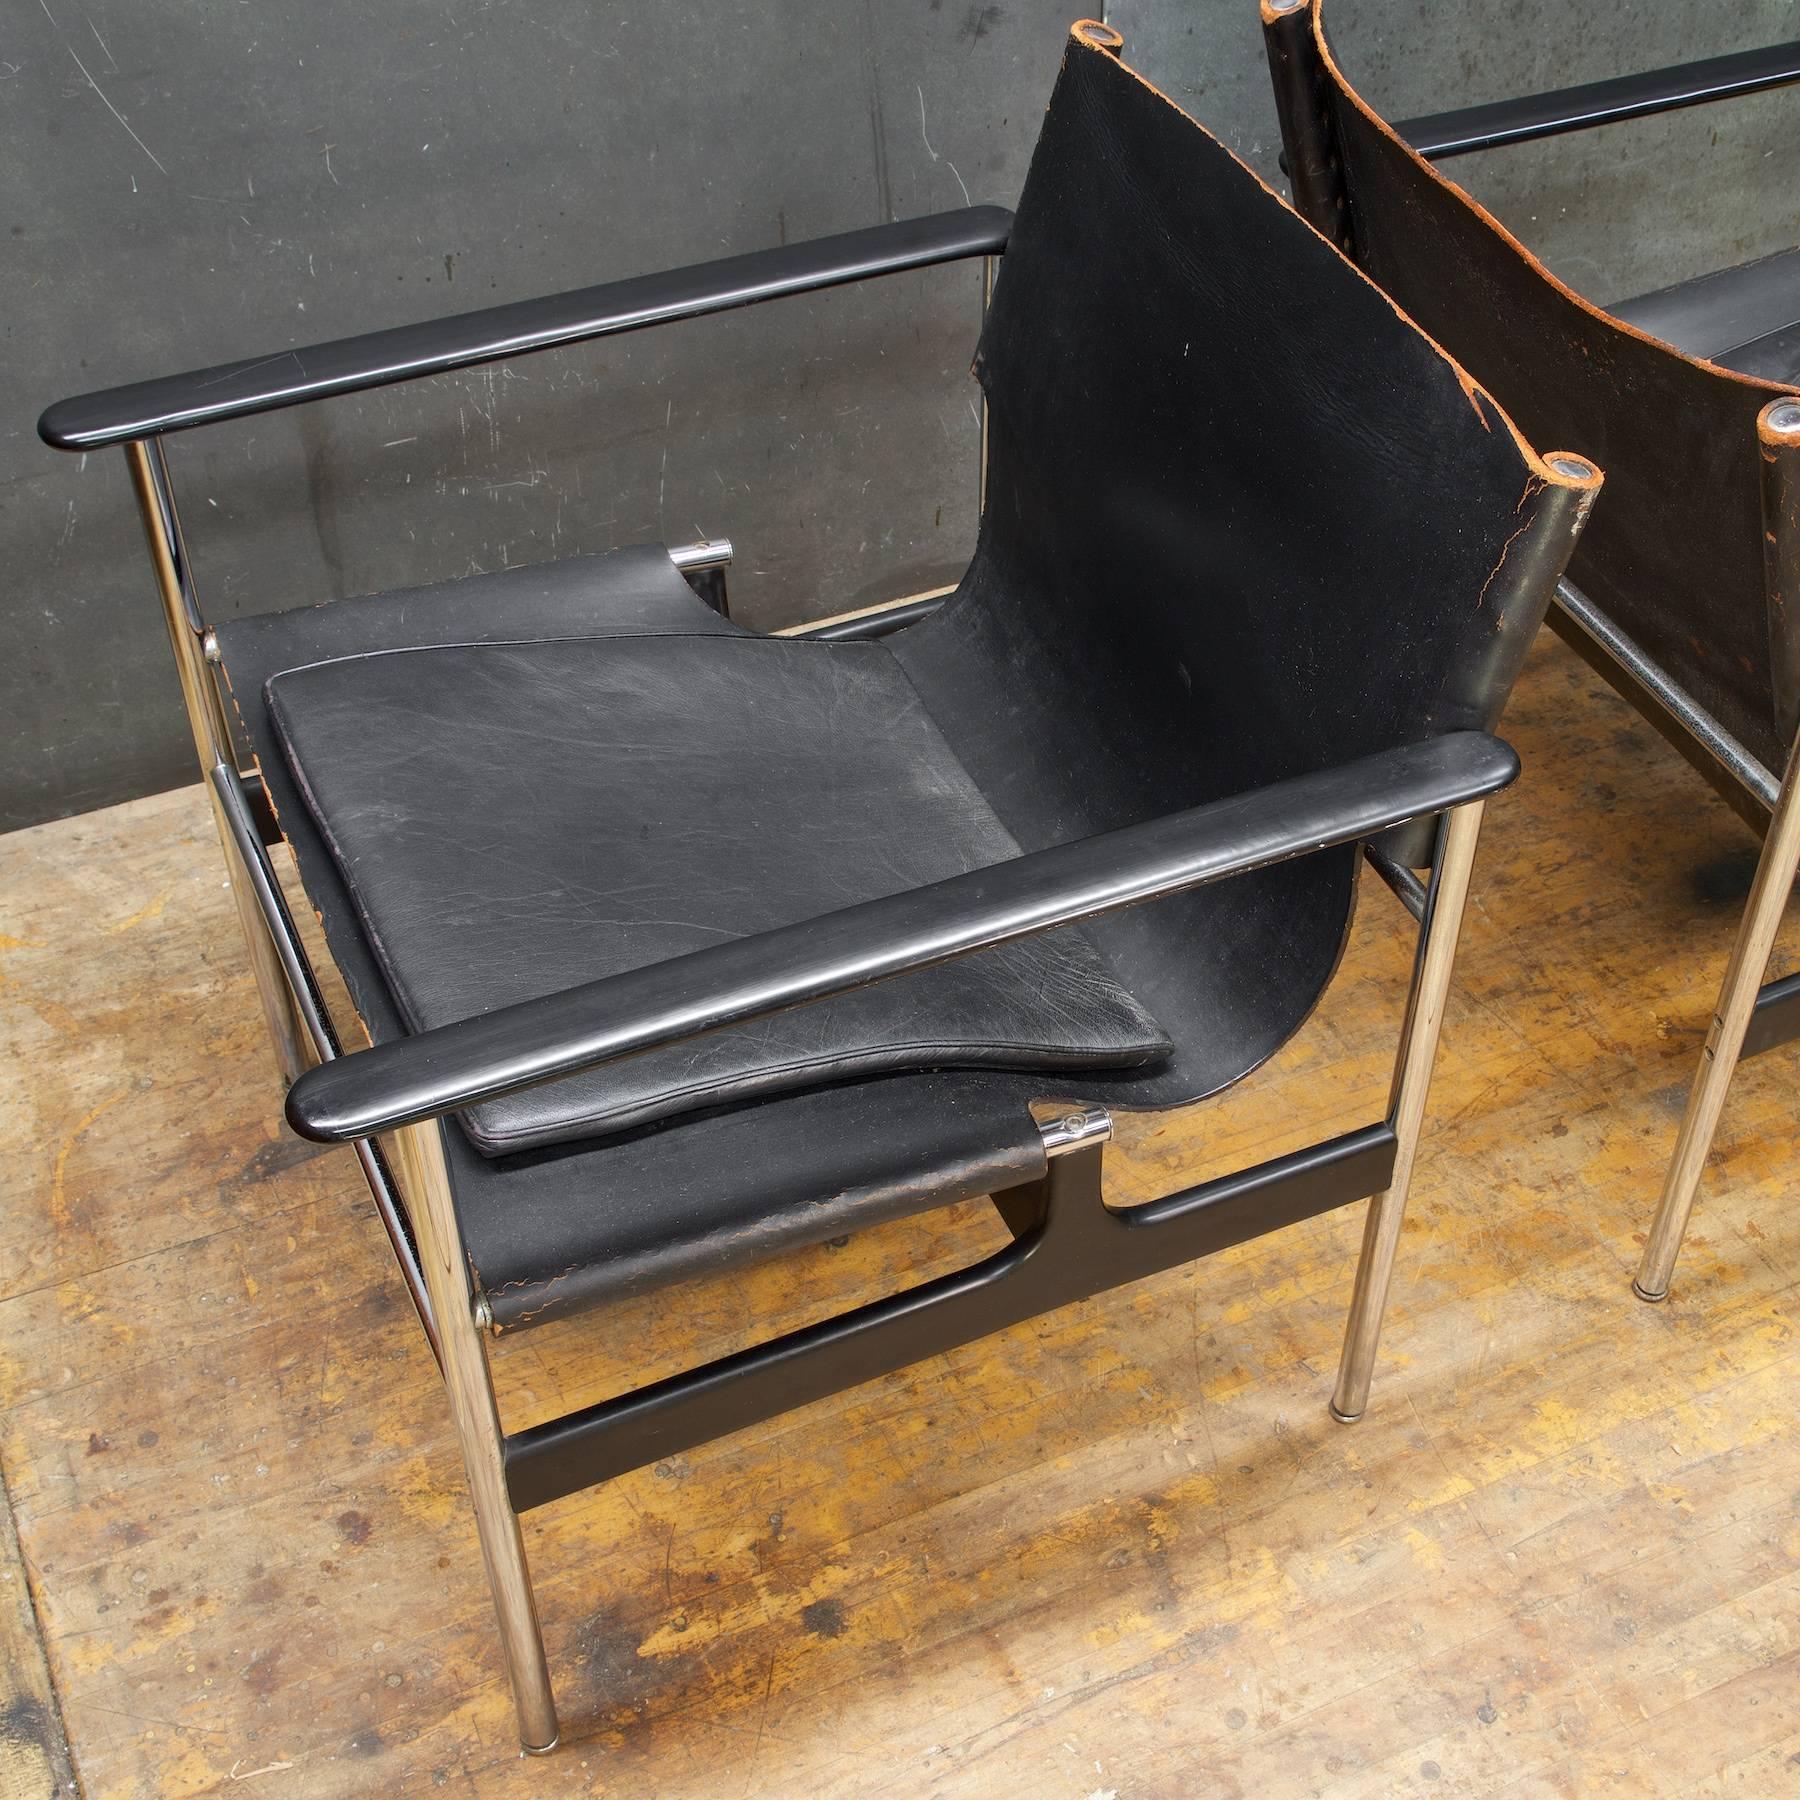 Polished Pair of Black Leather Chrome Sling Chairs by Charles Pollack Knoll Associates